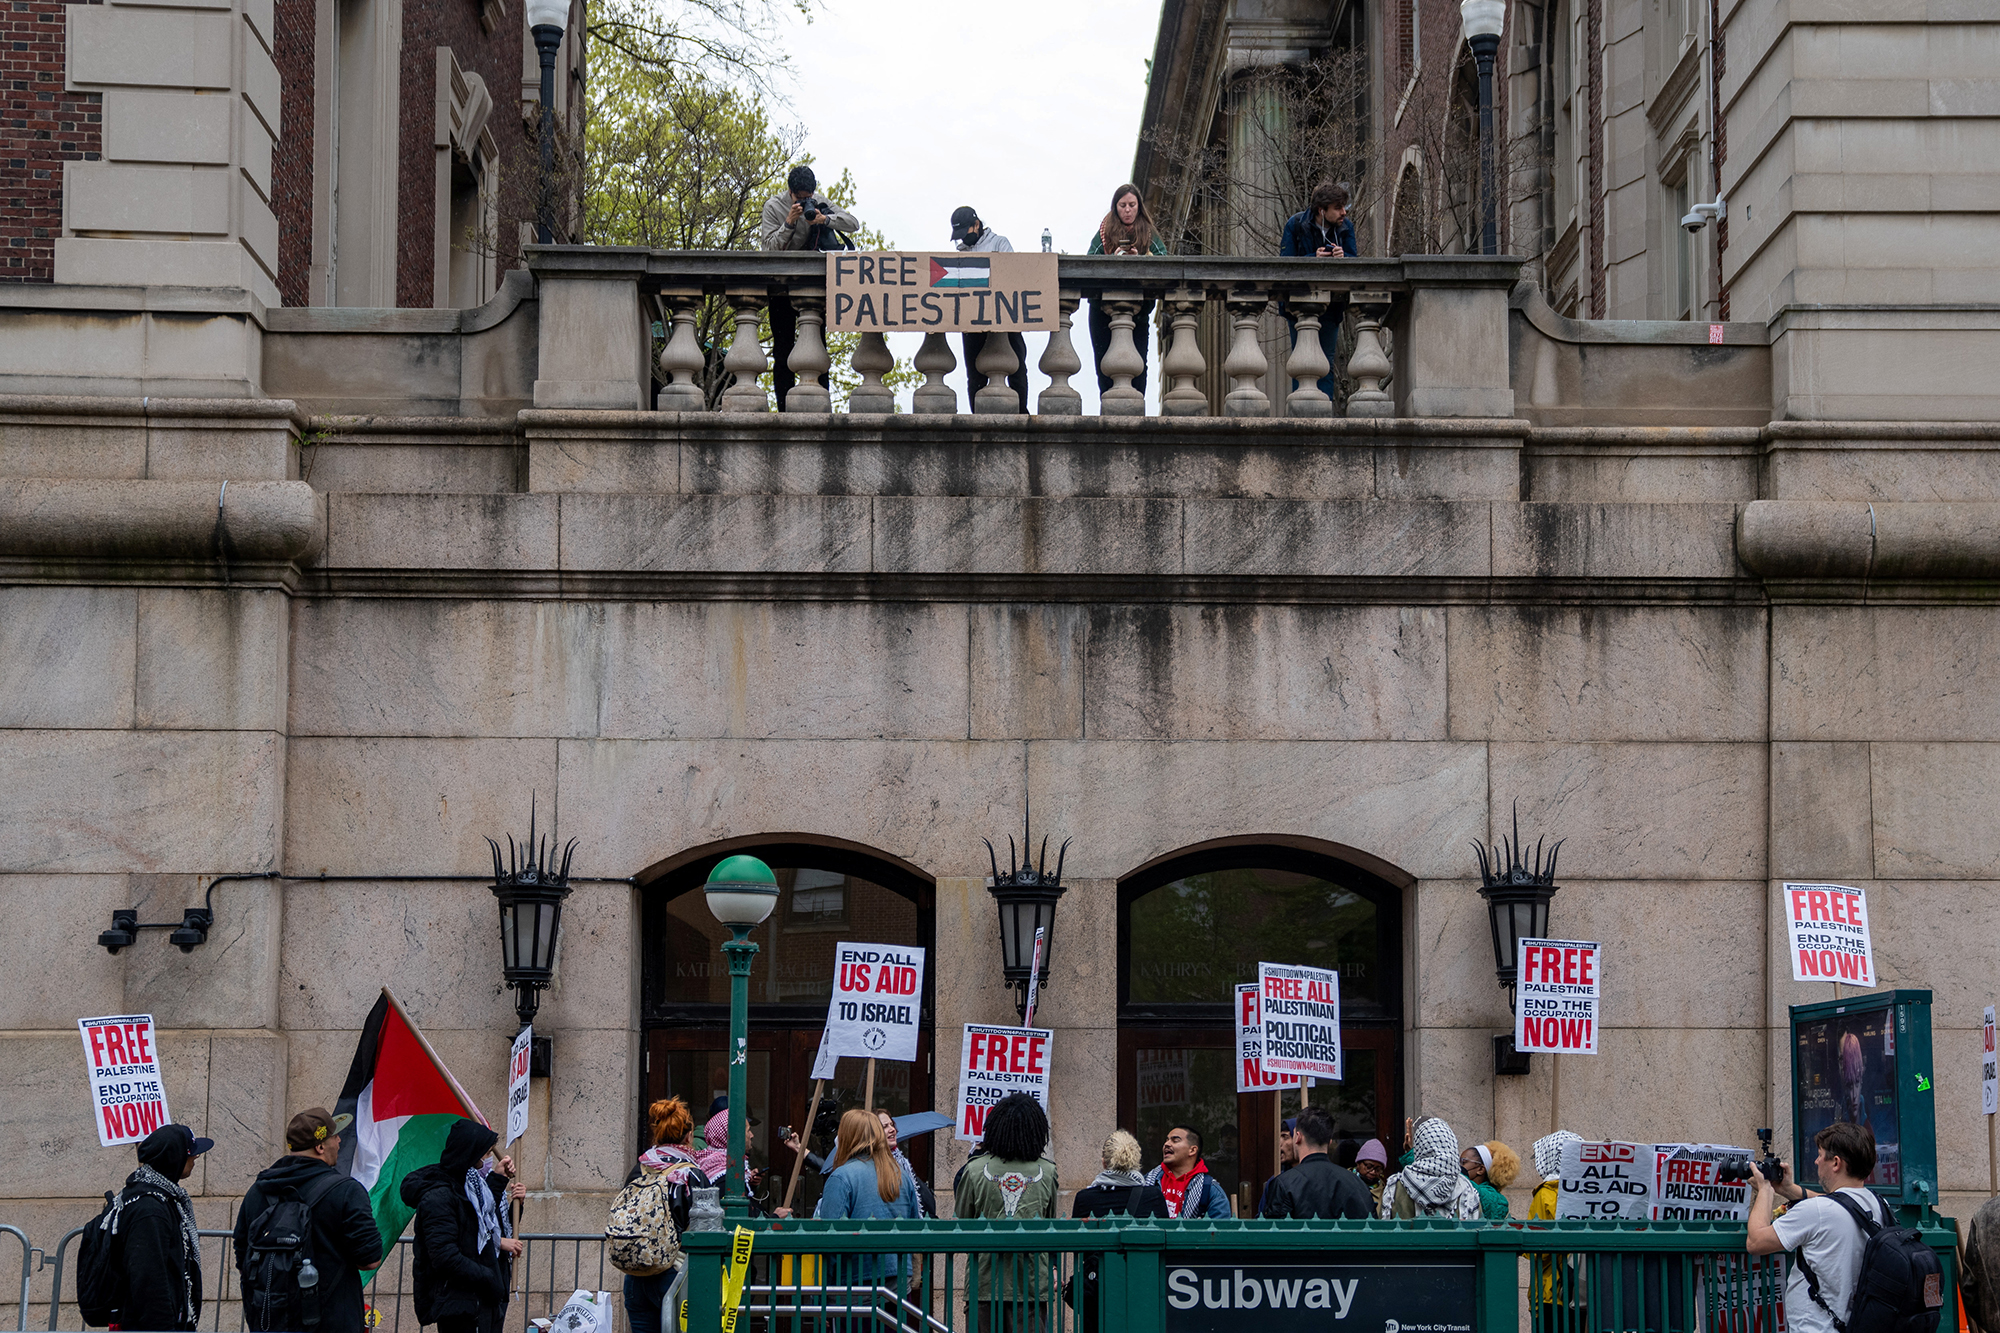 Protesters gather to show support for Palestinians in Gaza, outside of Columbia University in New York City on April 24.